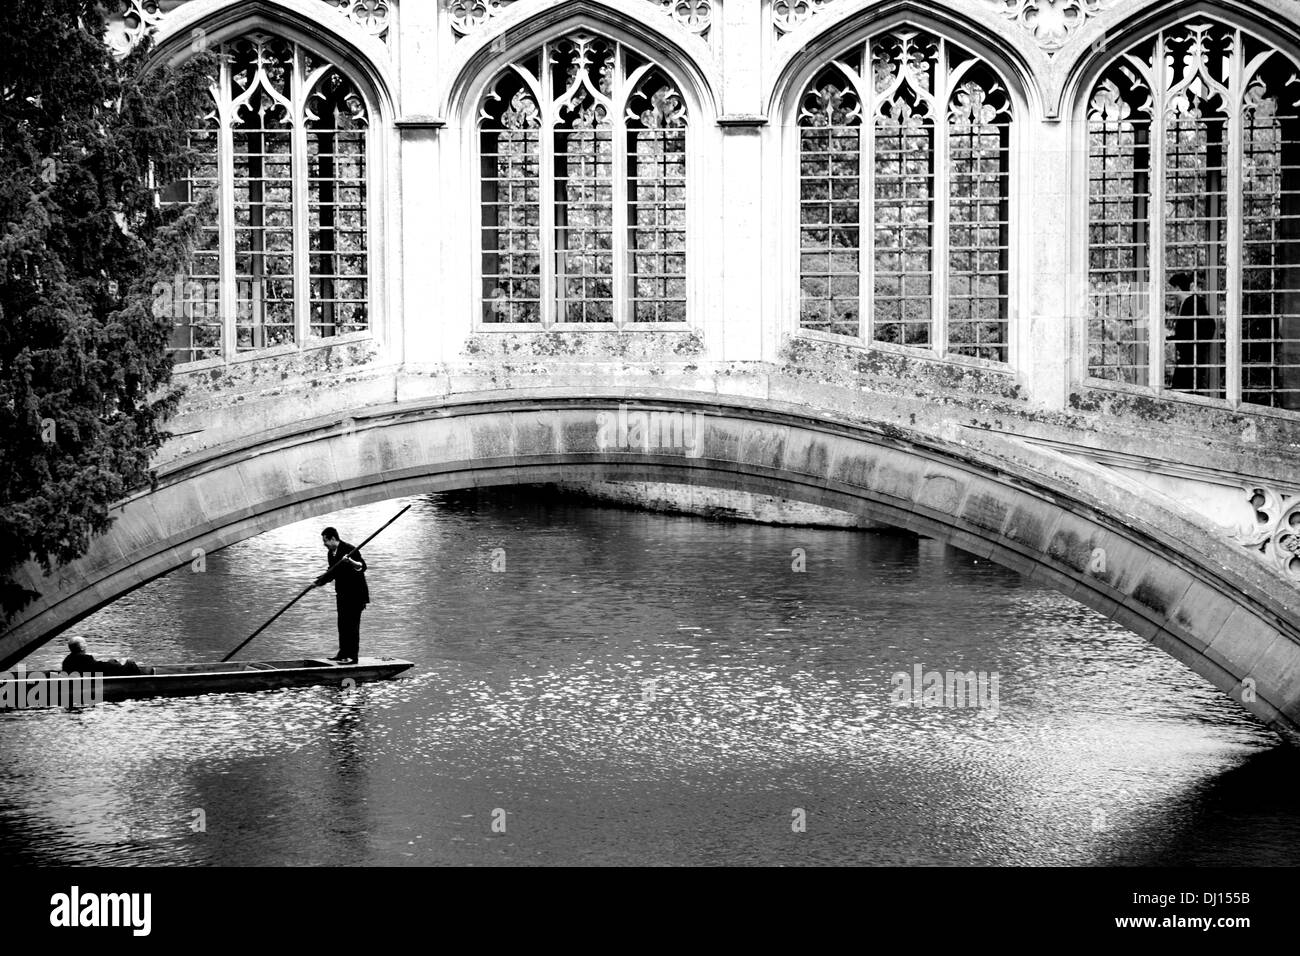 Bridge of Sighs with punting on the River Cam, St John's College Cambridge. Stock Photo